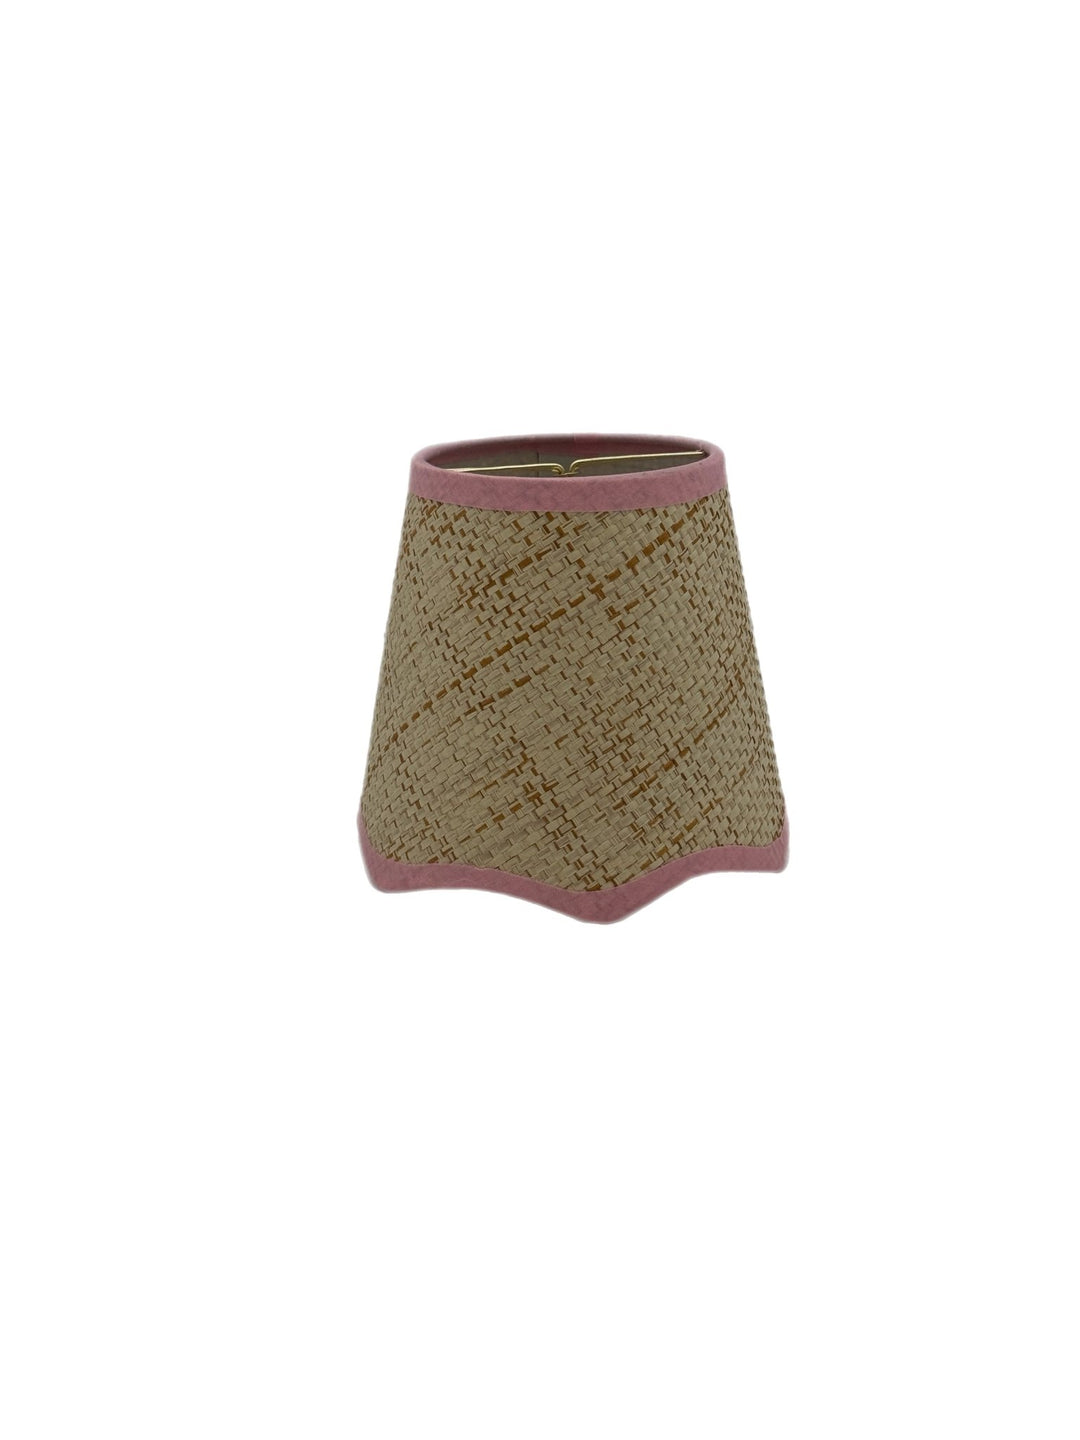 6" Raffia Hardback Scalloped Chandelier Shade - Pink trim Top and Bottom - Lux Lamp Shades